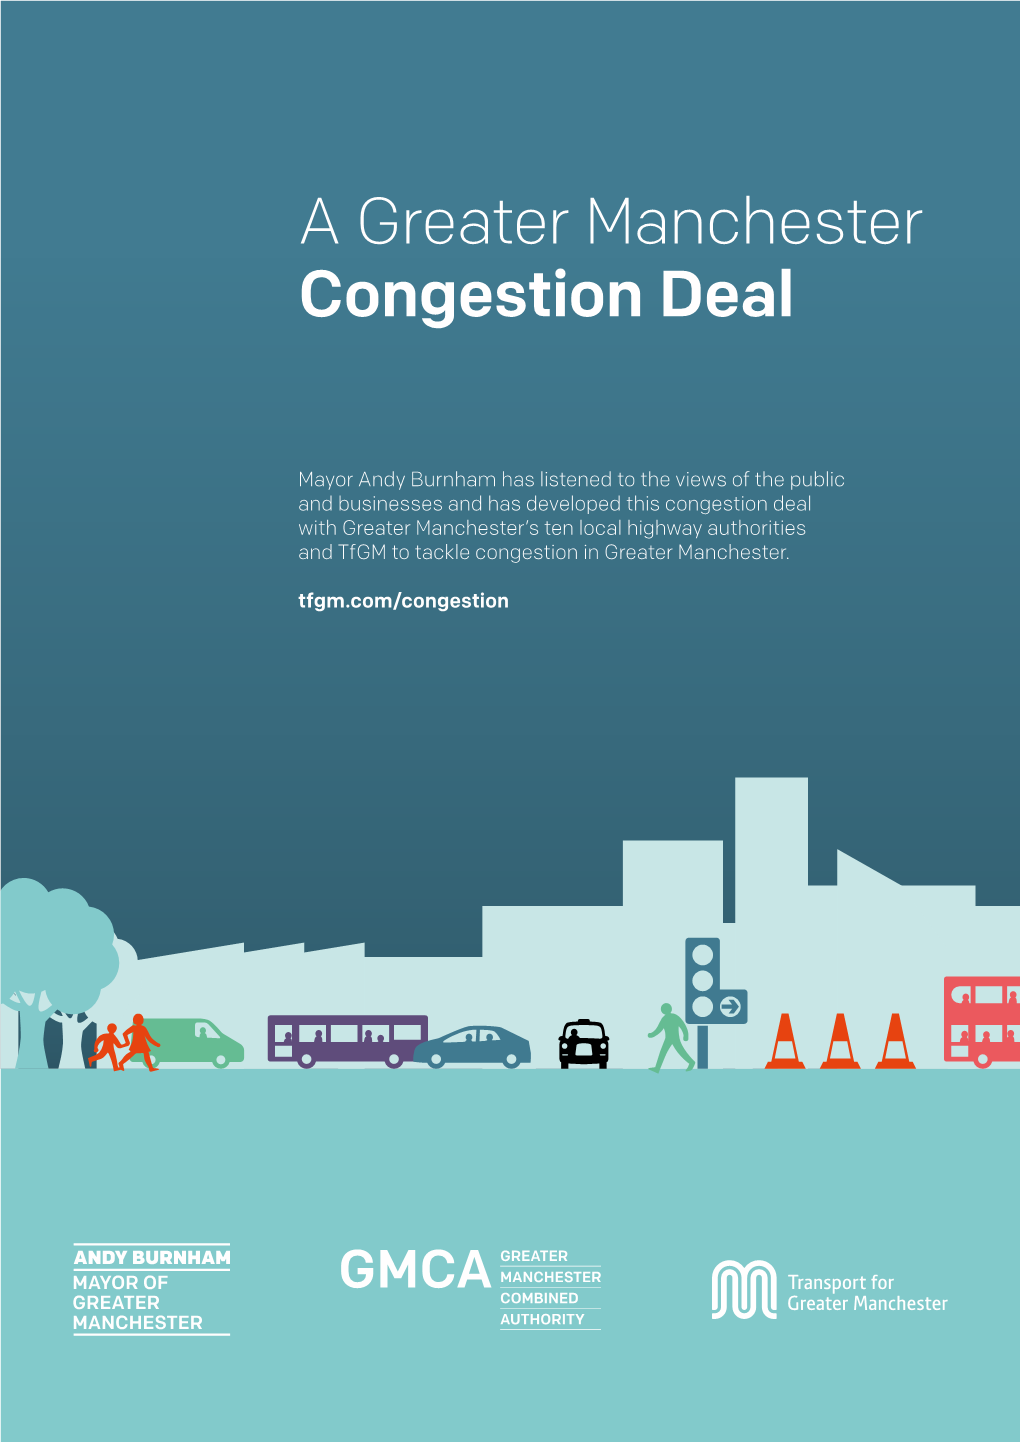 A Greater Manchester Congestion Deal